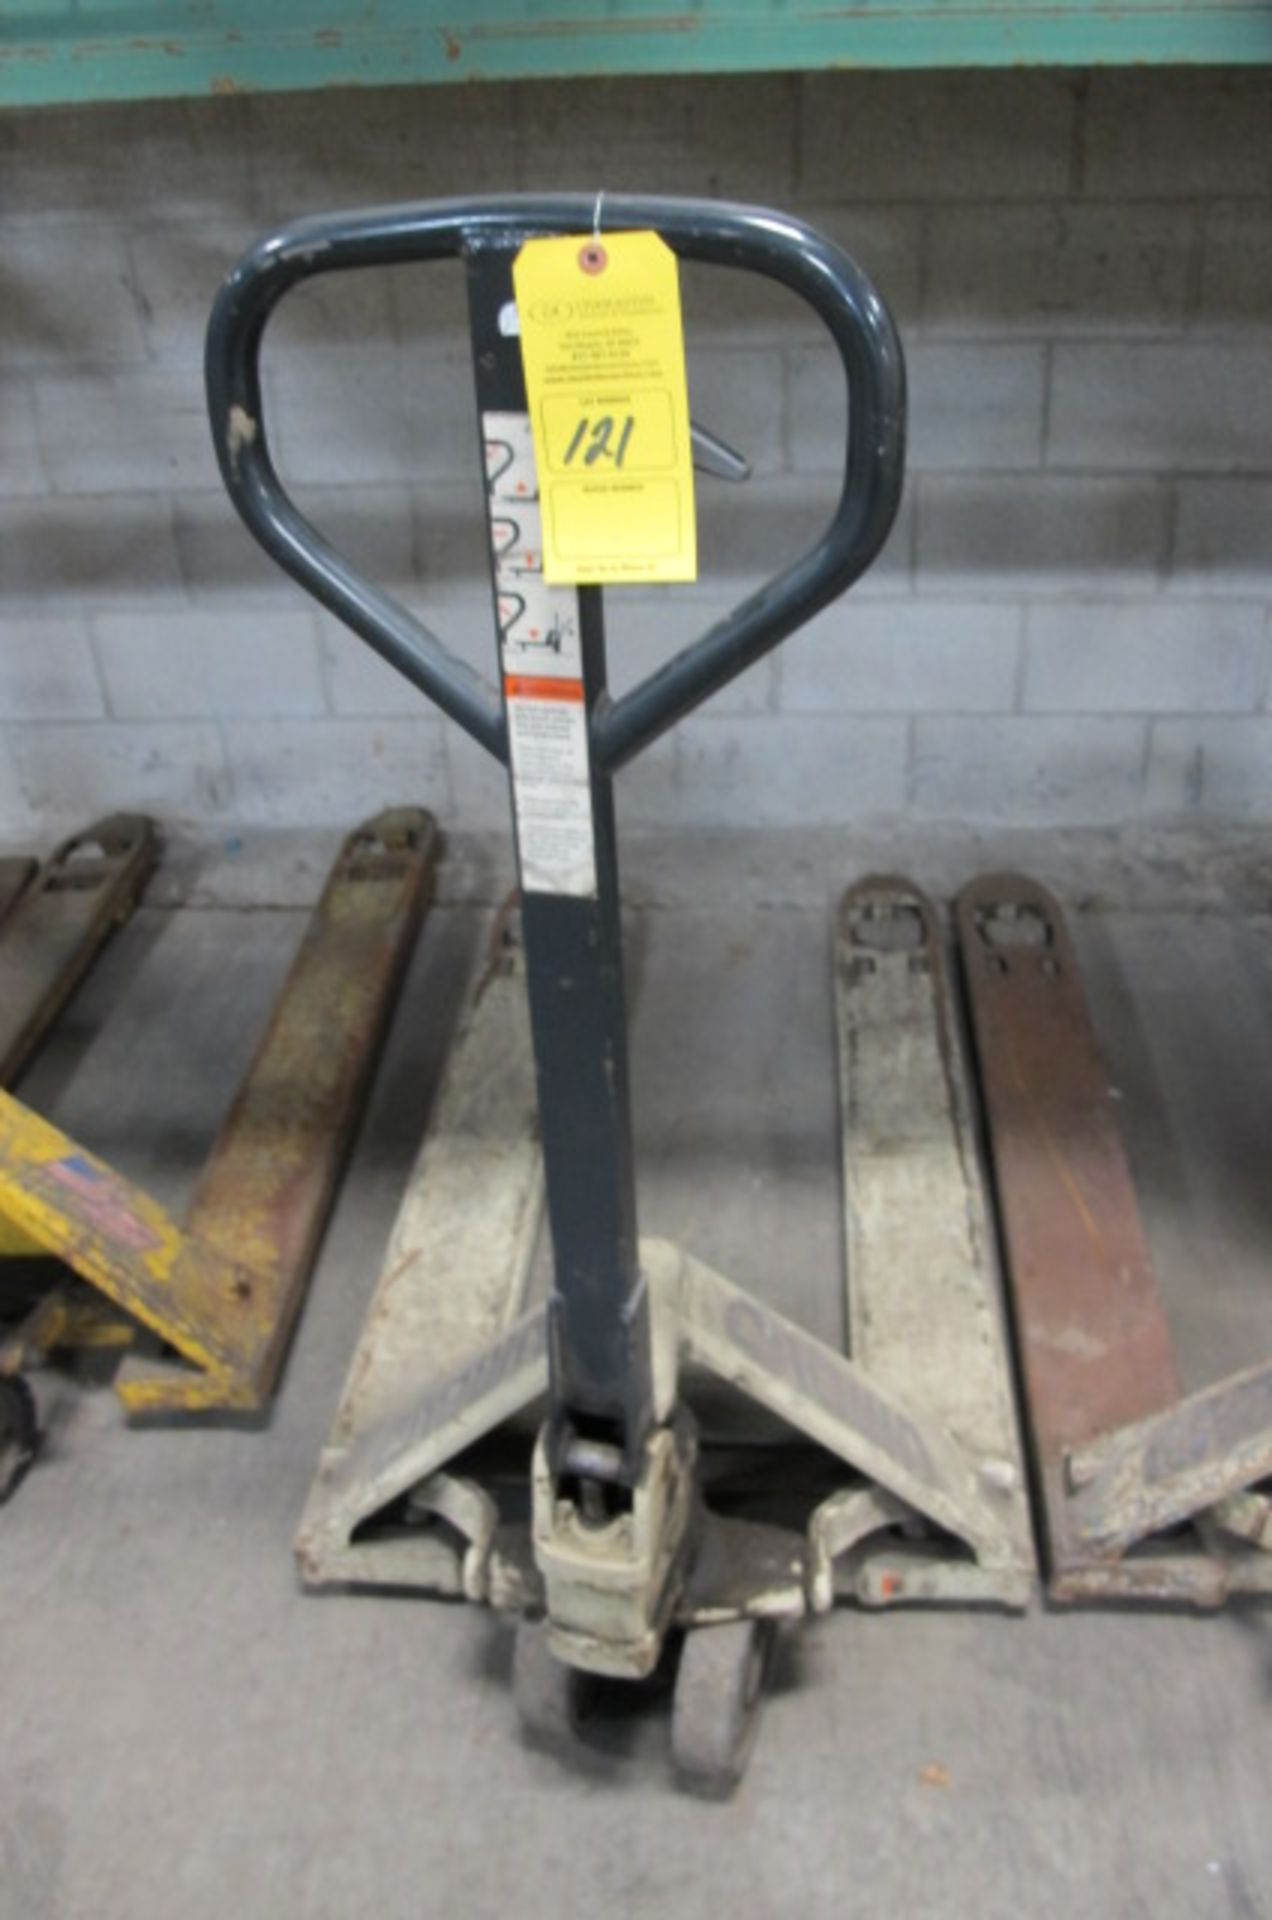 CROWN PALLET JACK 7466 OH 120, Lyons, Ohio 43523 - all Gaylord plastic pallets are NOT included with